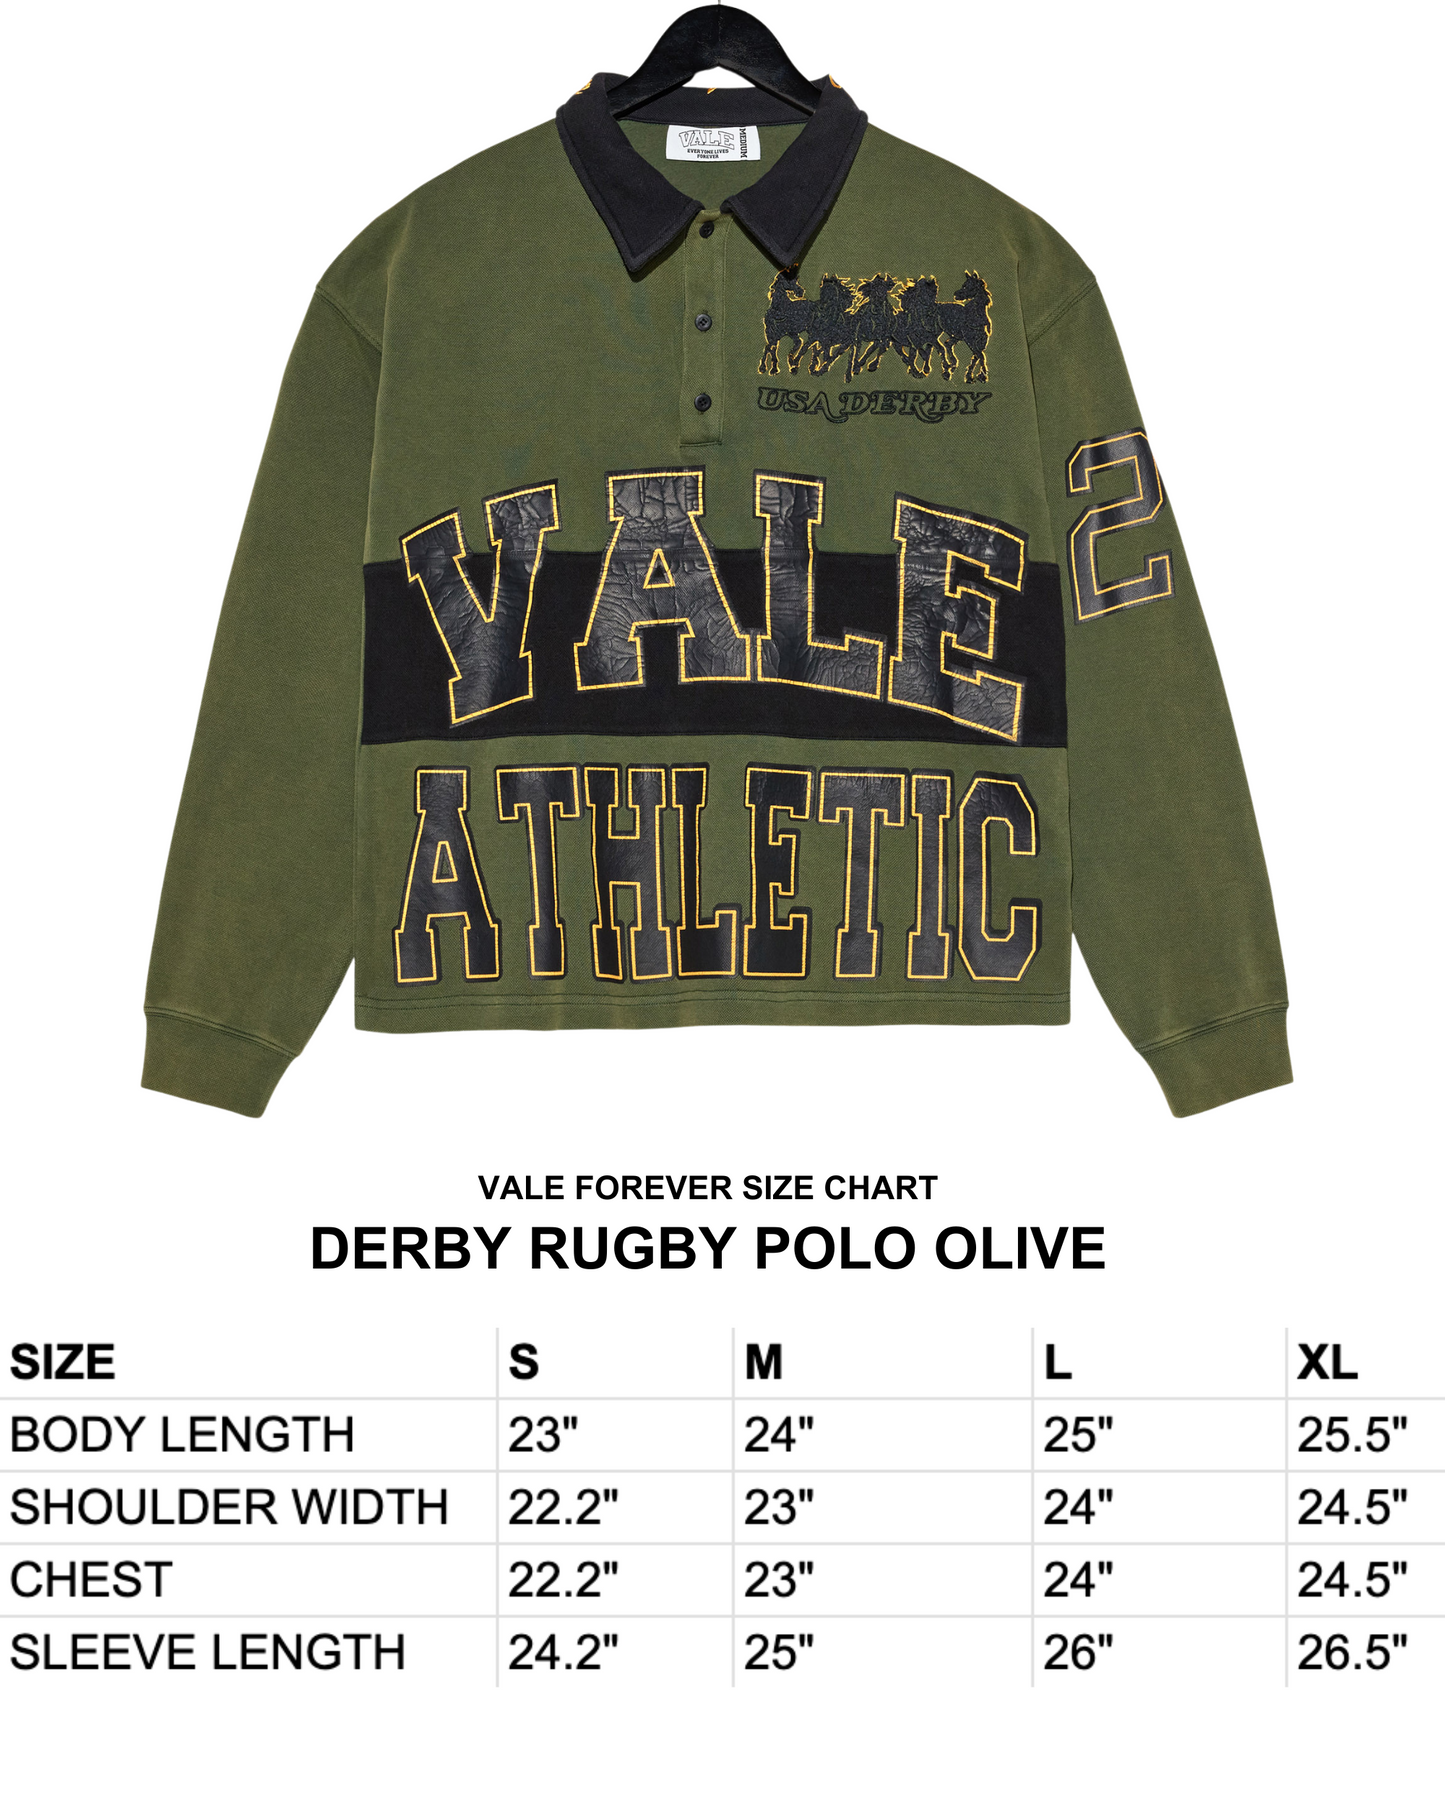 DERBY RUGBY POLO OLIVE